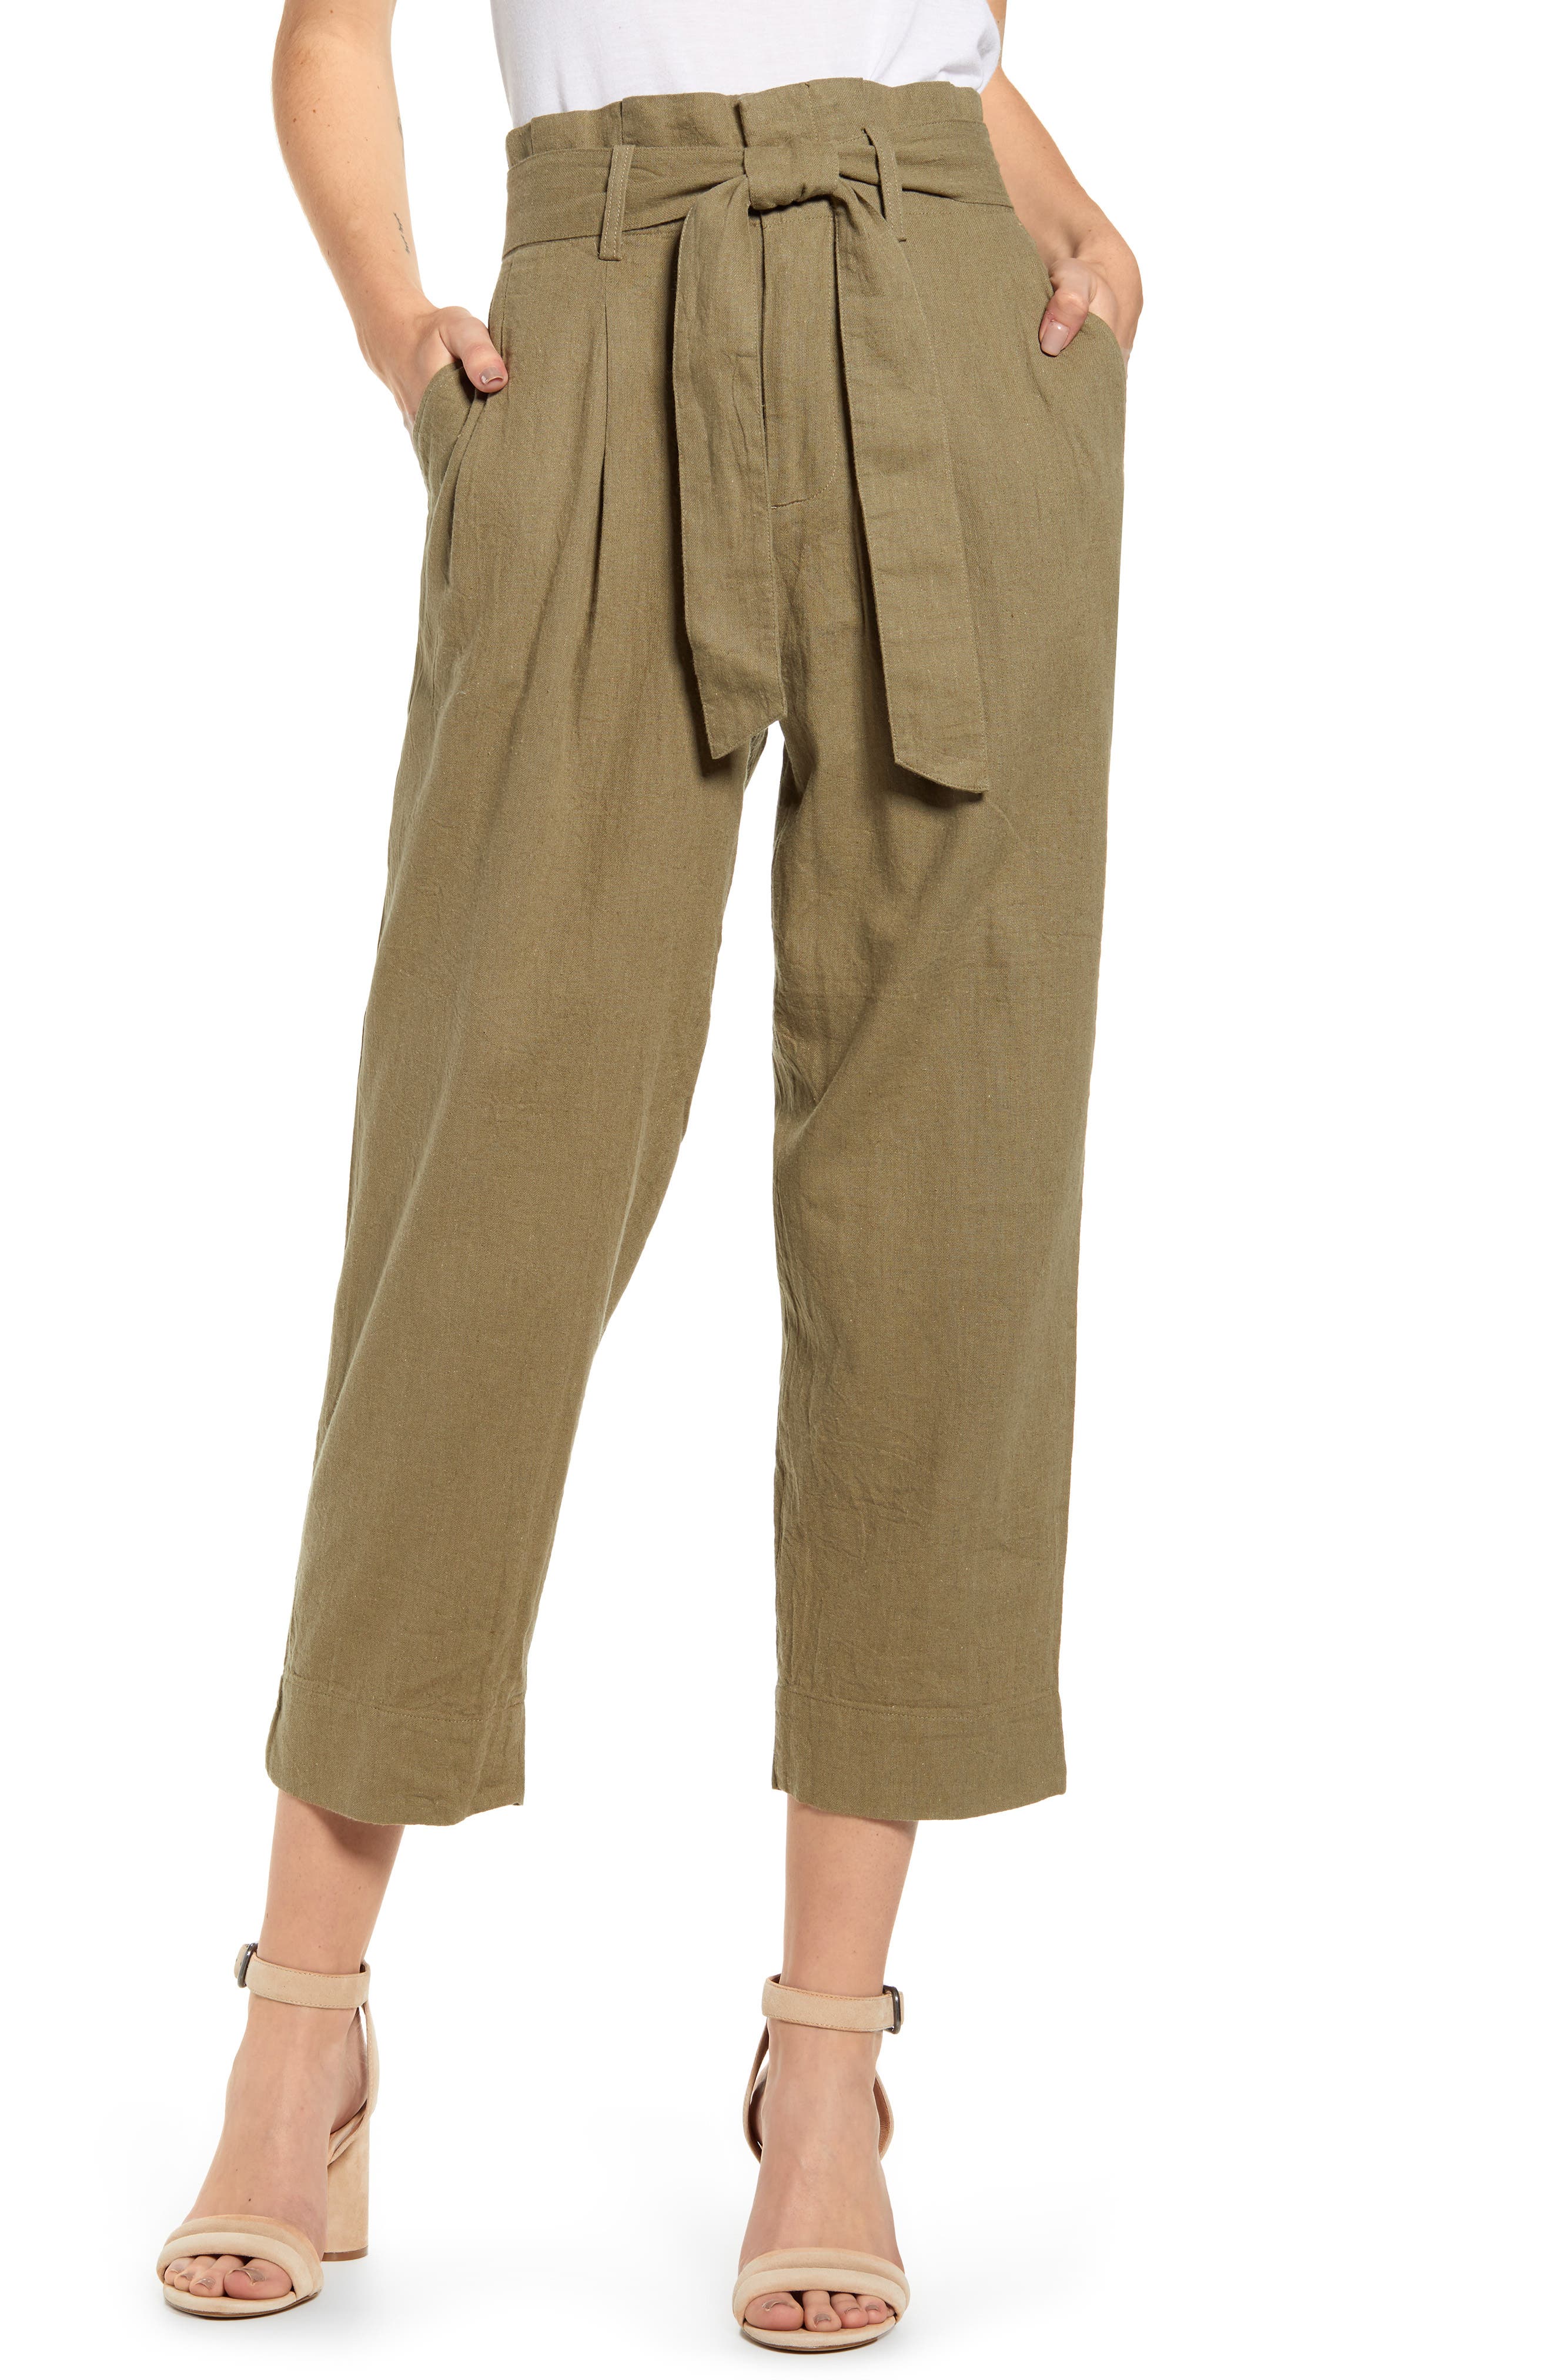 madewell pants nordstrom